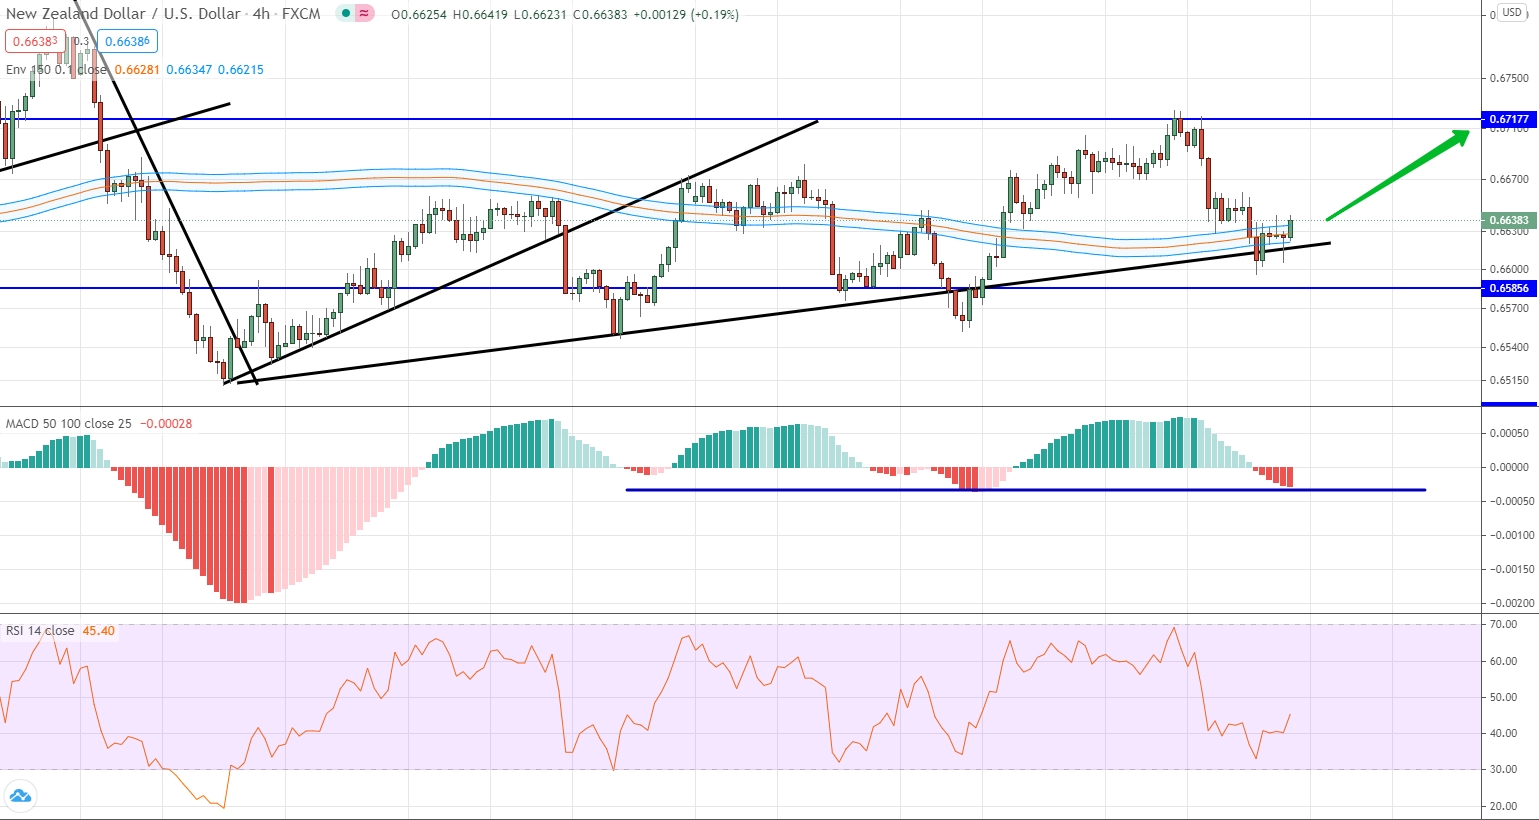 NZD/USD analysis by moving averages, RSI and MACD